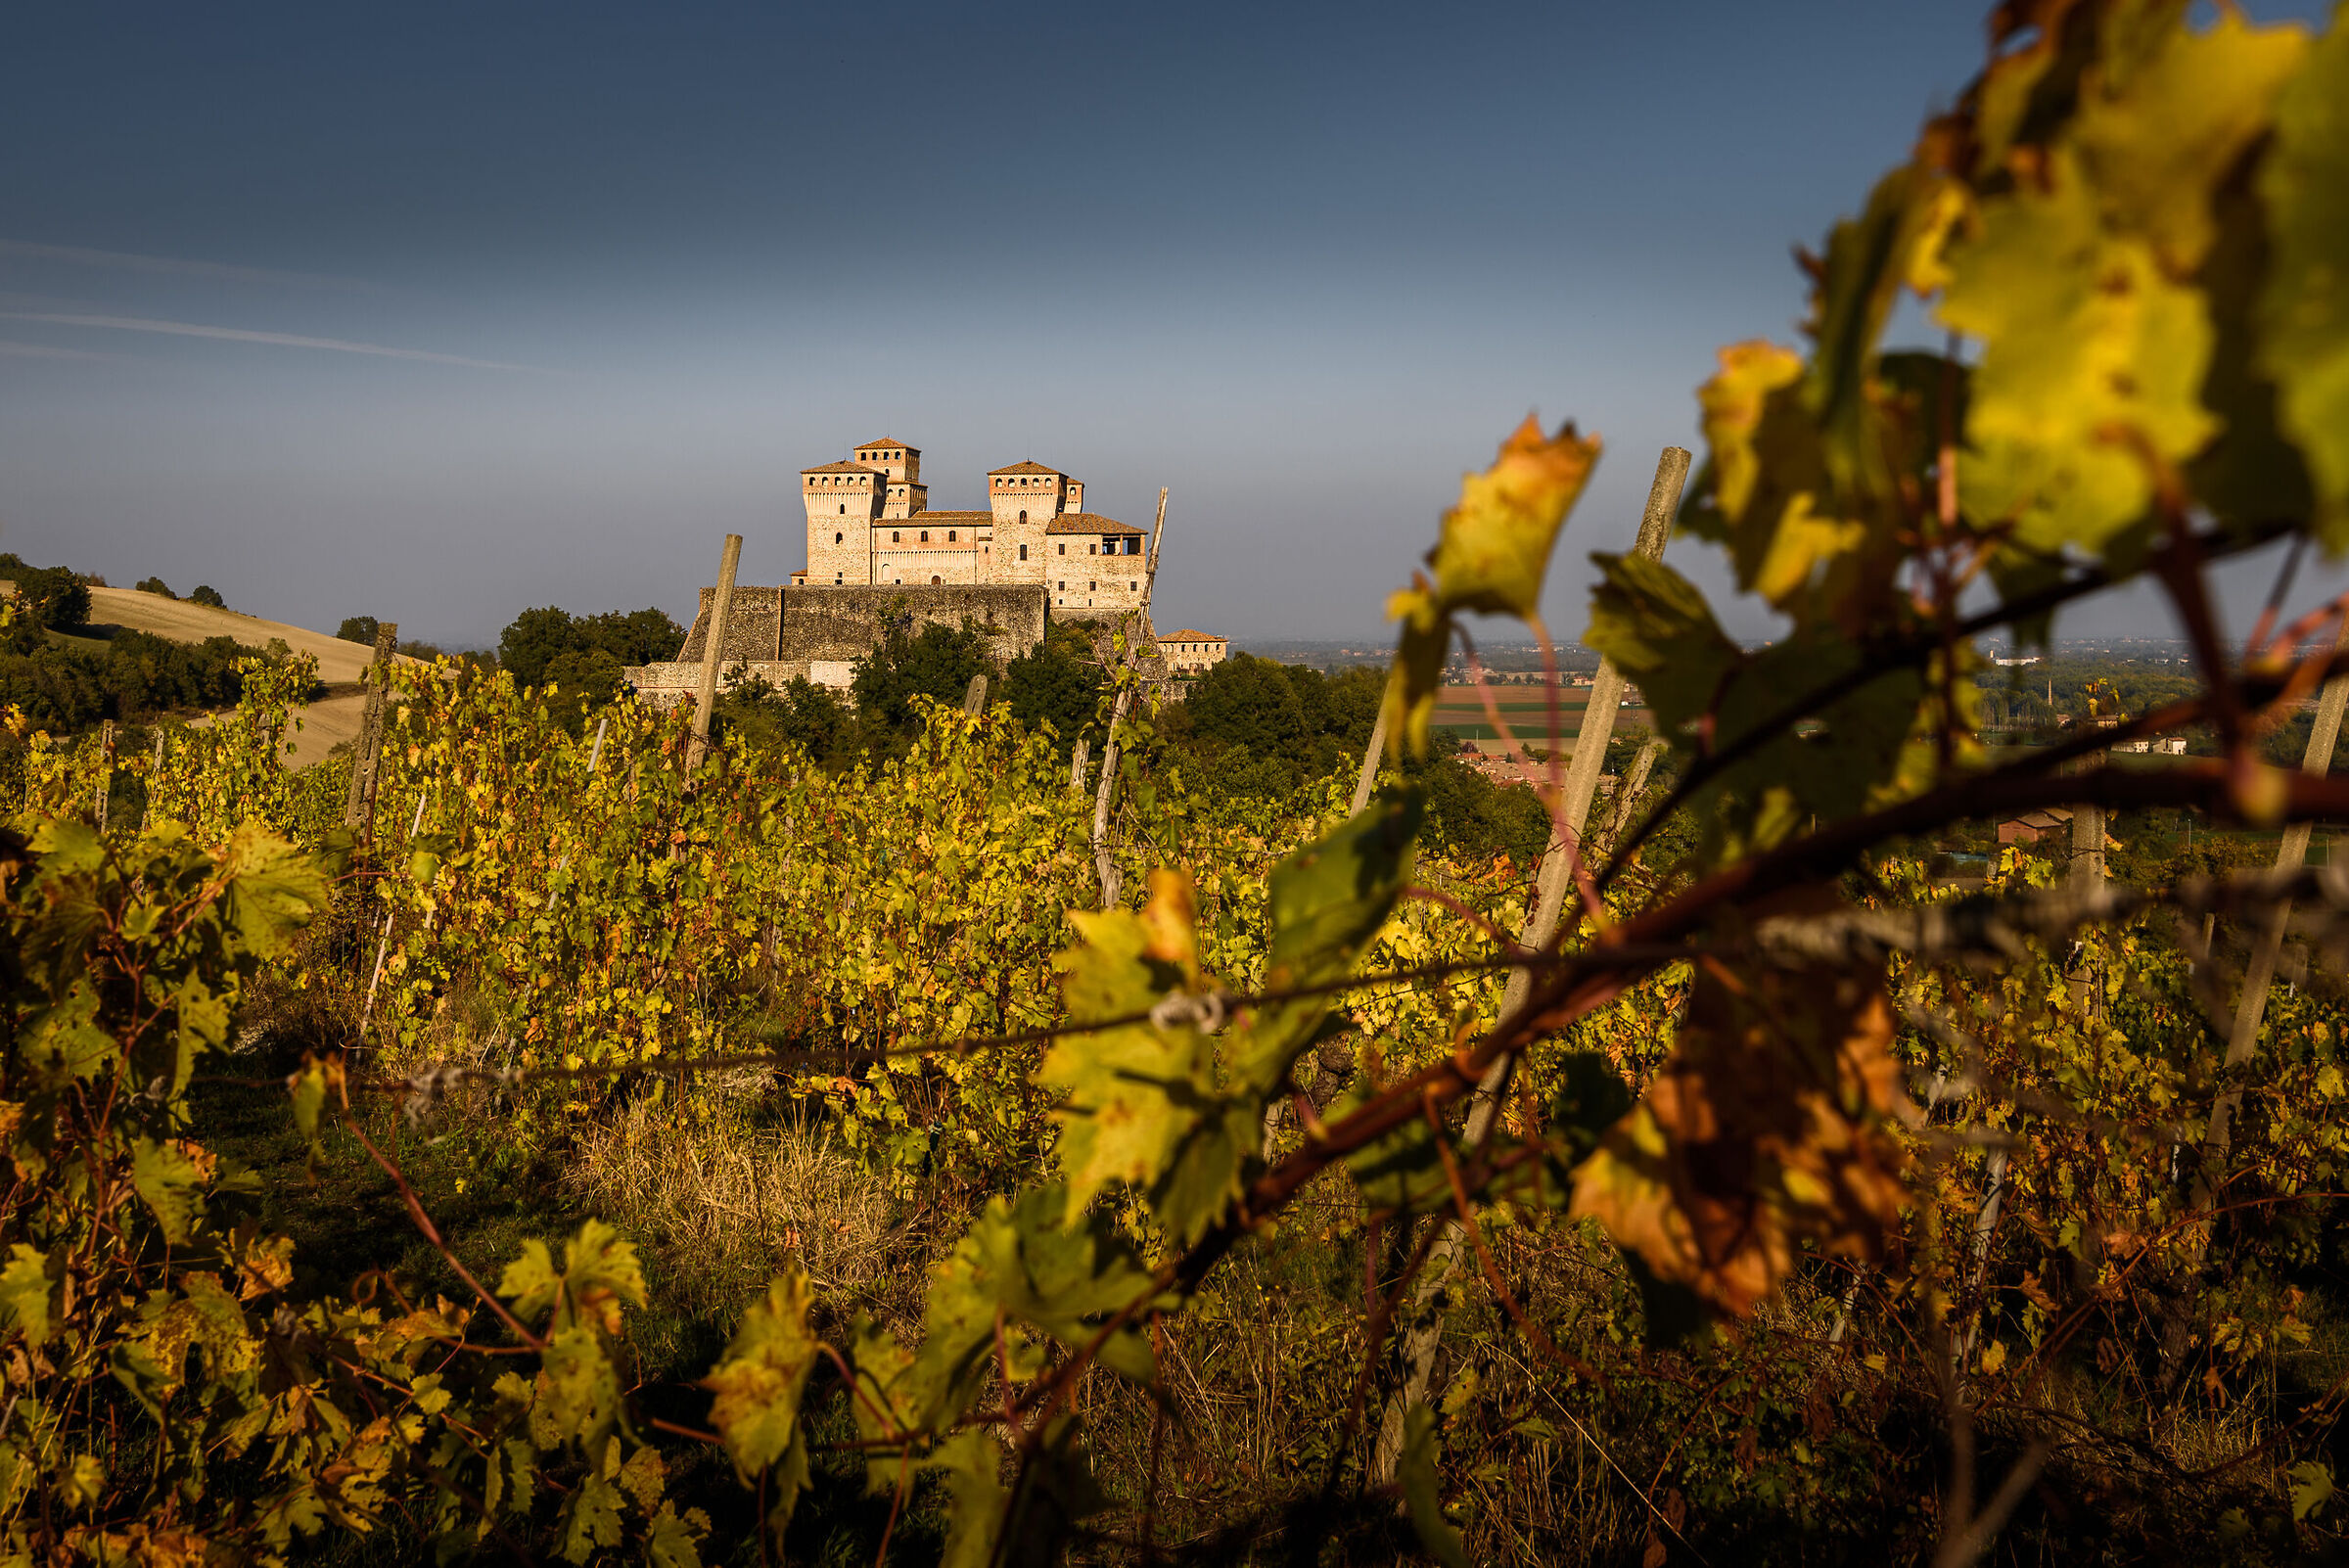 The castle among the vineyards...